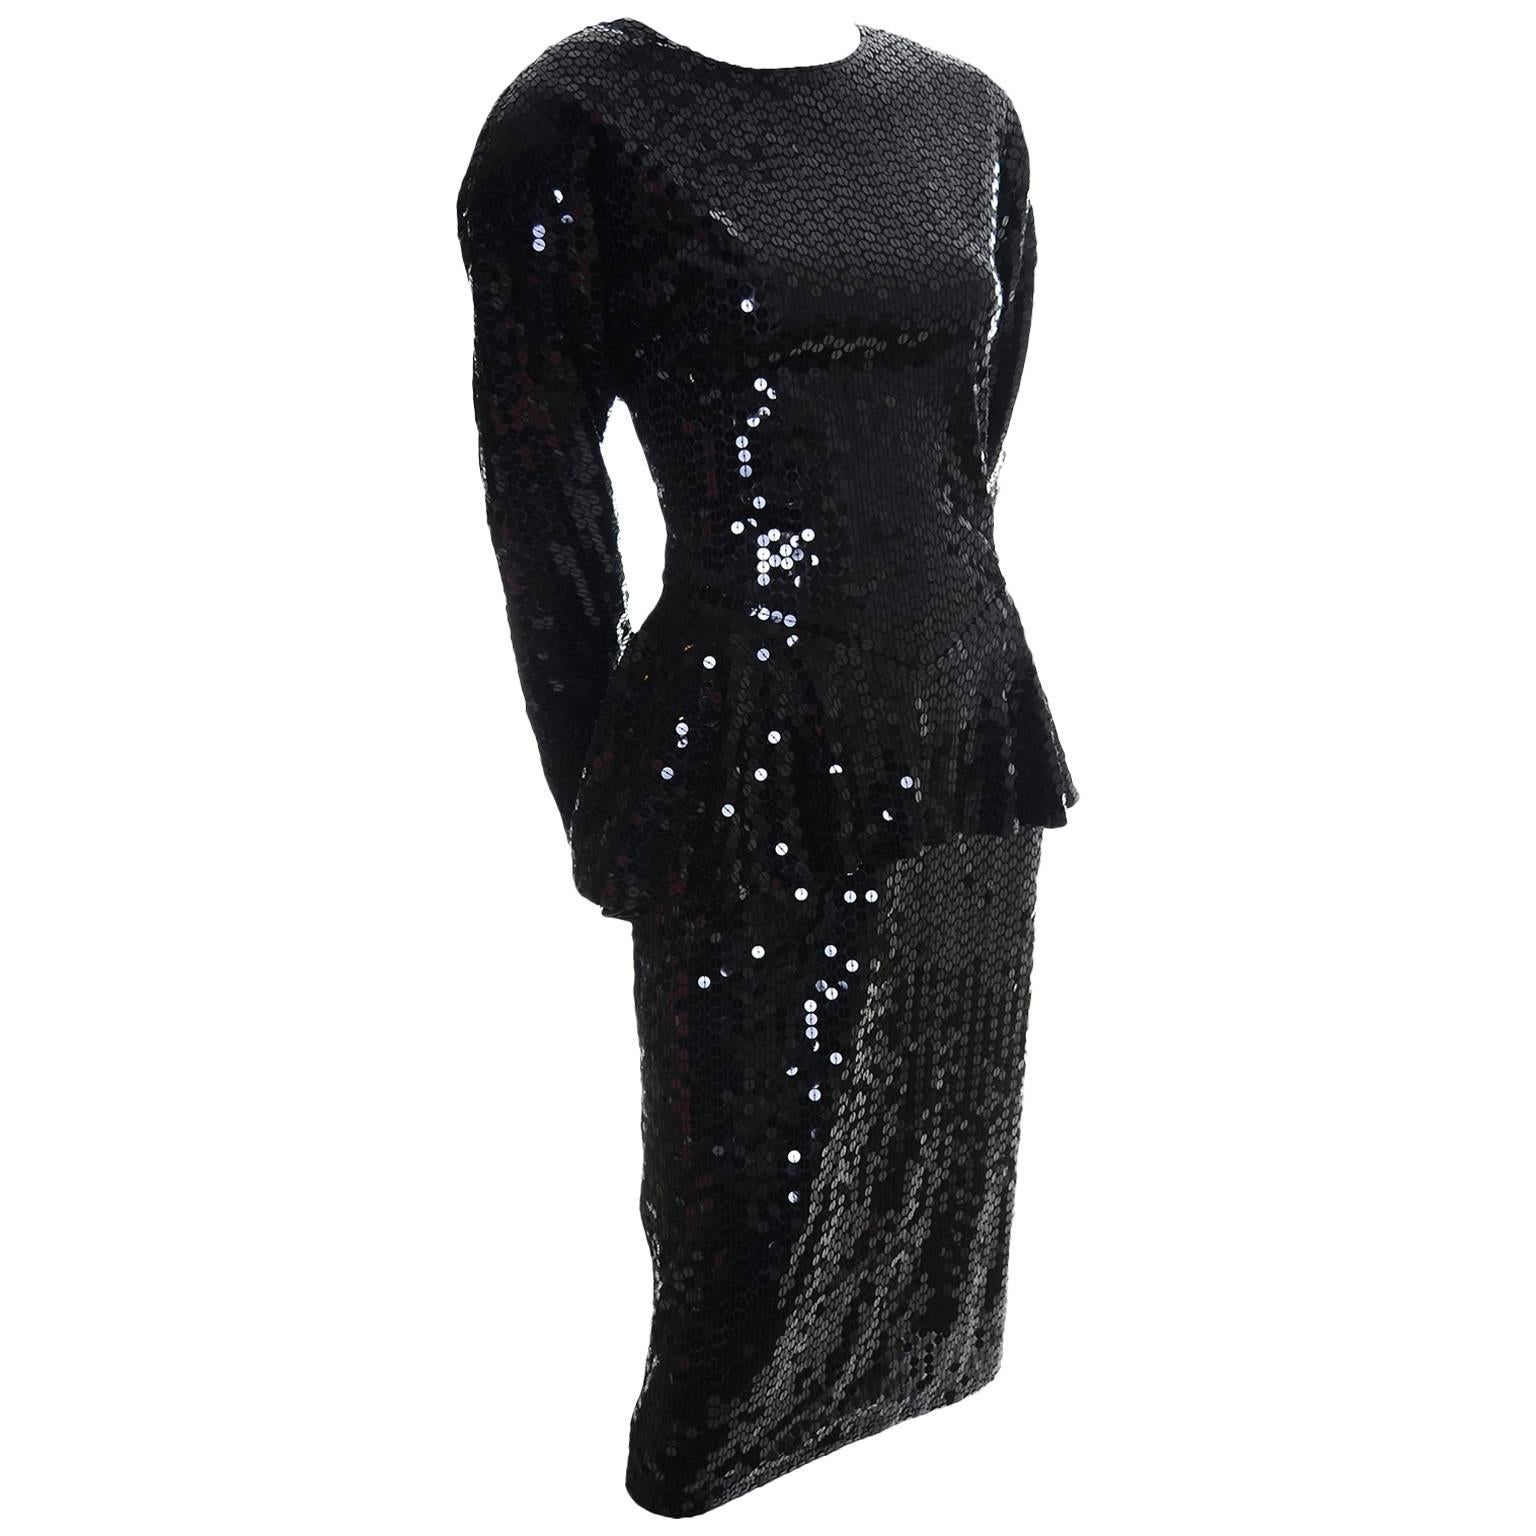 1980s Lillie Rubin Vintage Dress With Peplum in Black With Sequins